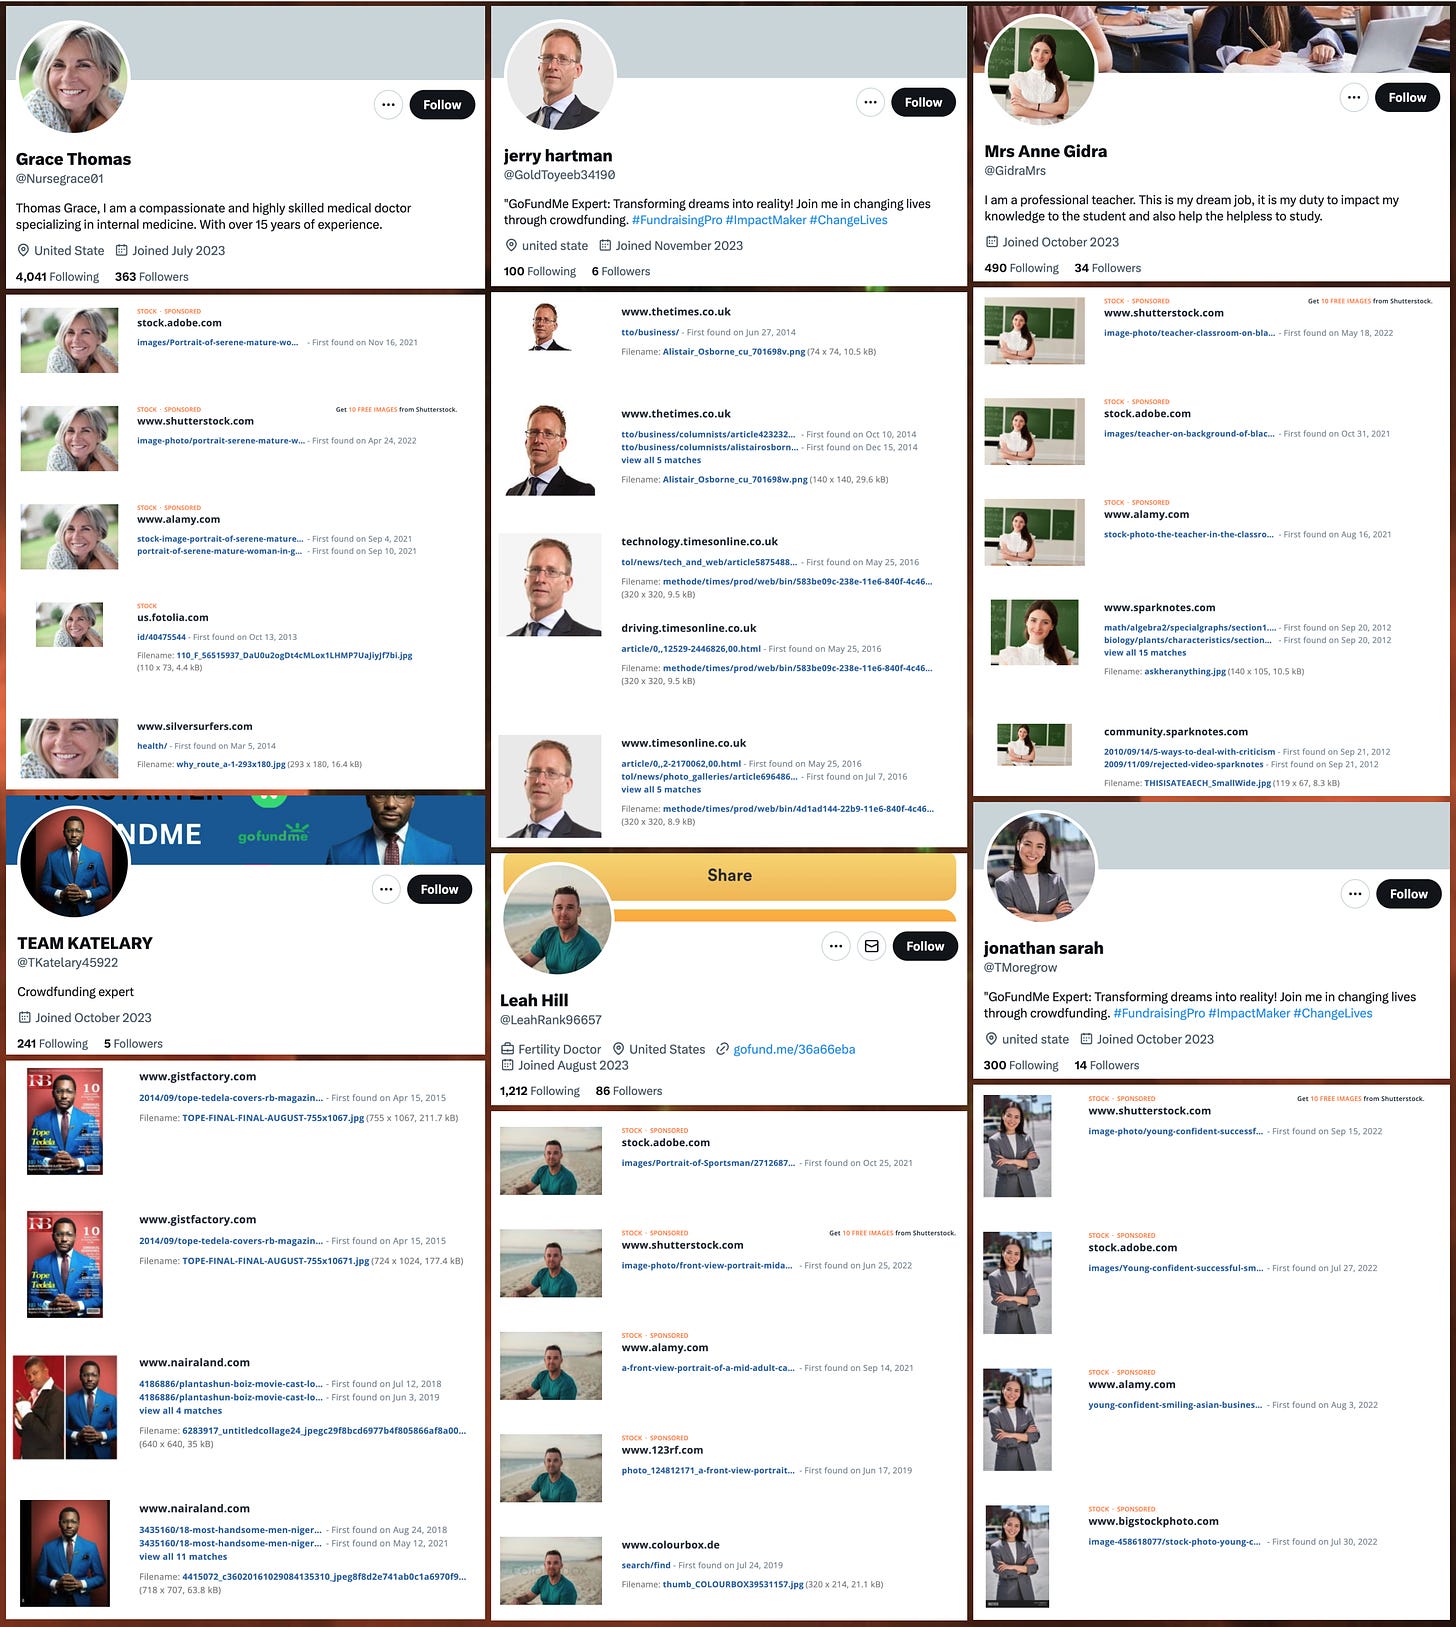 screenshots of the profiles of crowdfunding spam accounts, and screenshots of TinEye searches showing that the profile photos are plagiarized